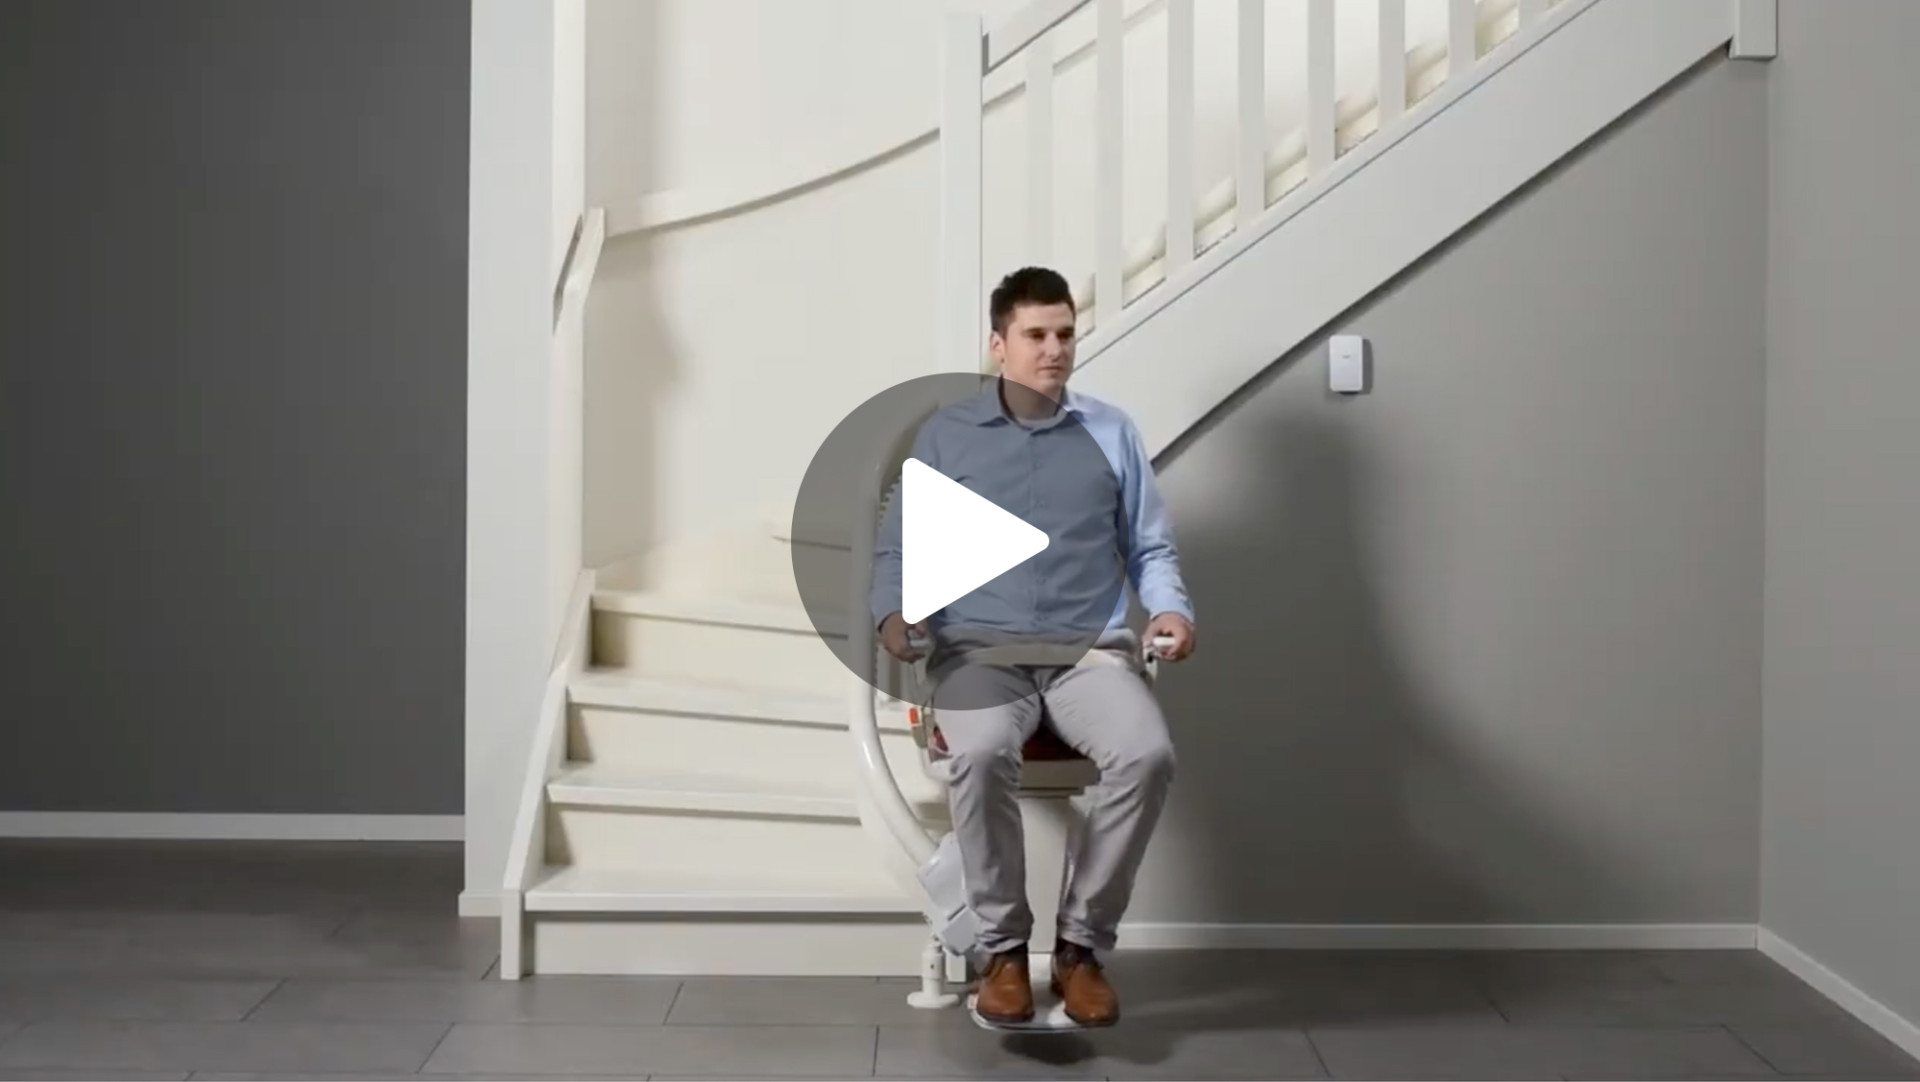 Video template for stairlifts